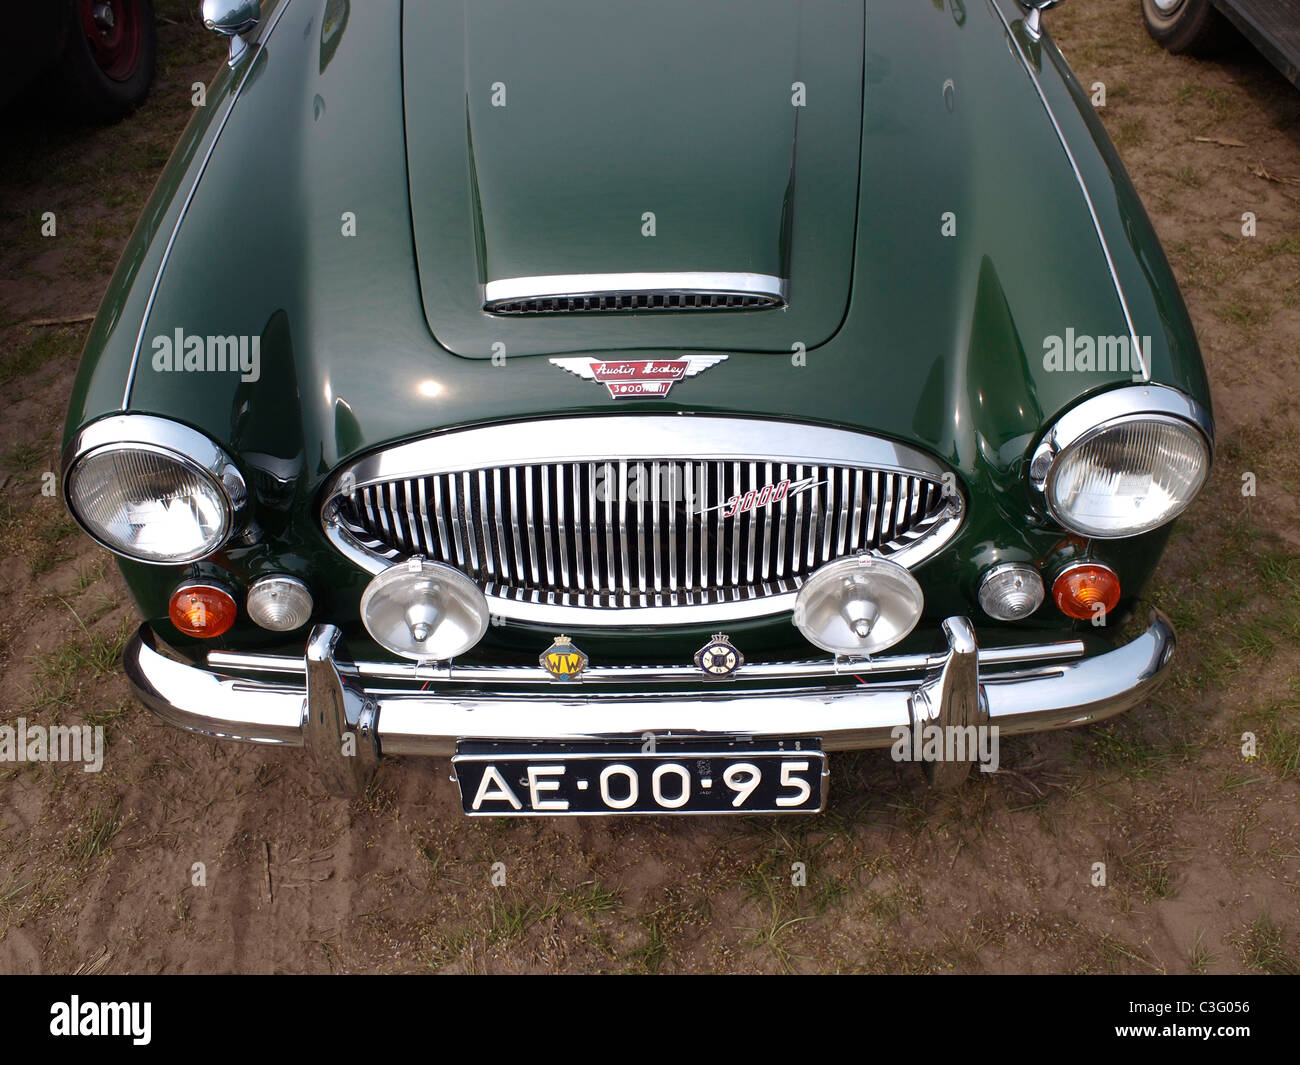 shiny Austin Healey 3000 mkIII front with Dutch oldtimer license plate. Stock Photo